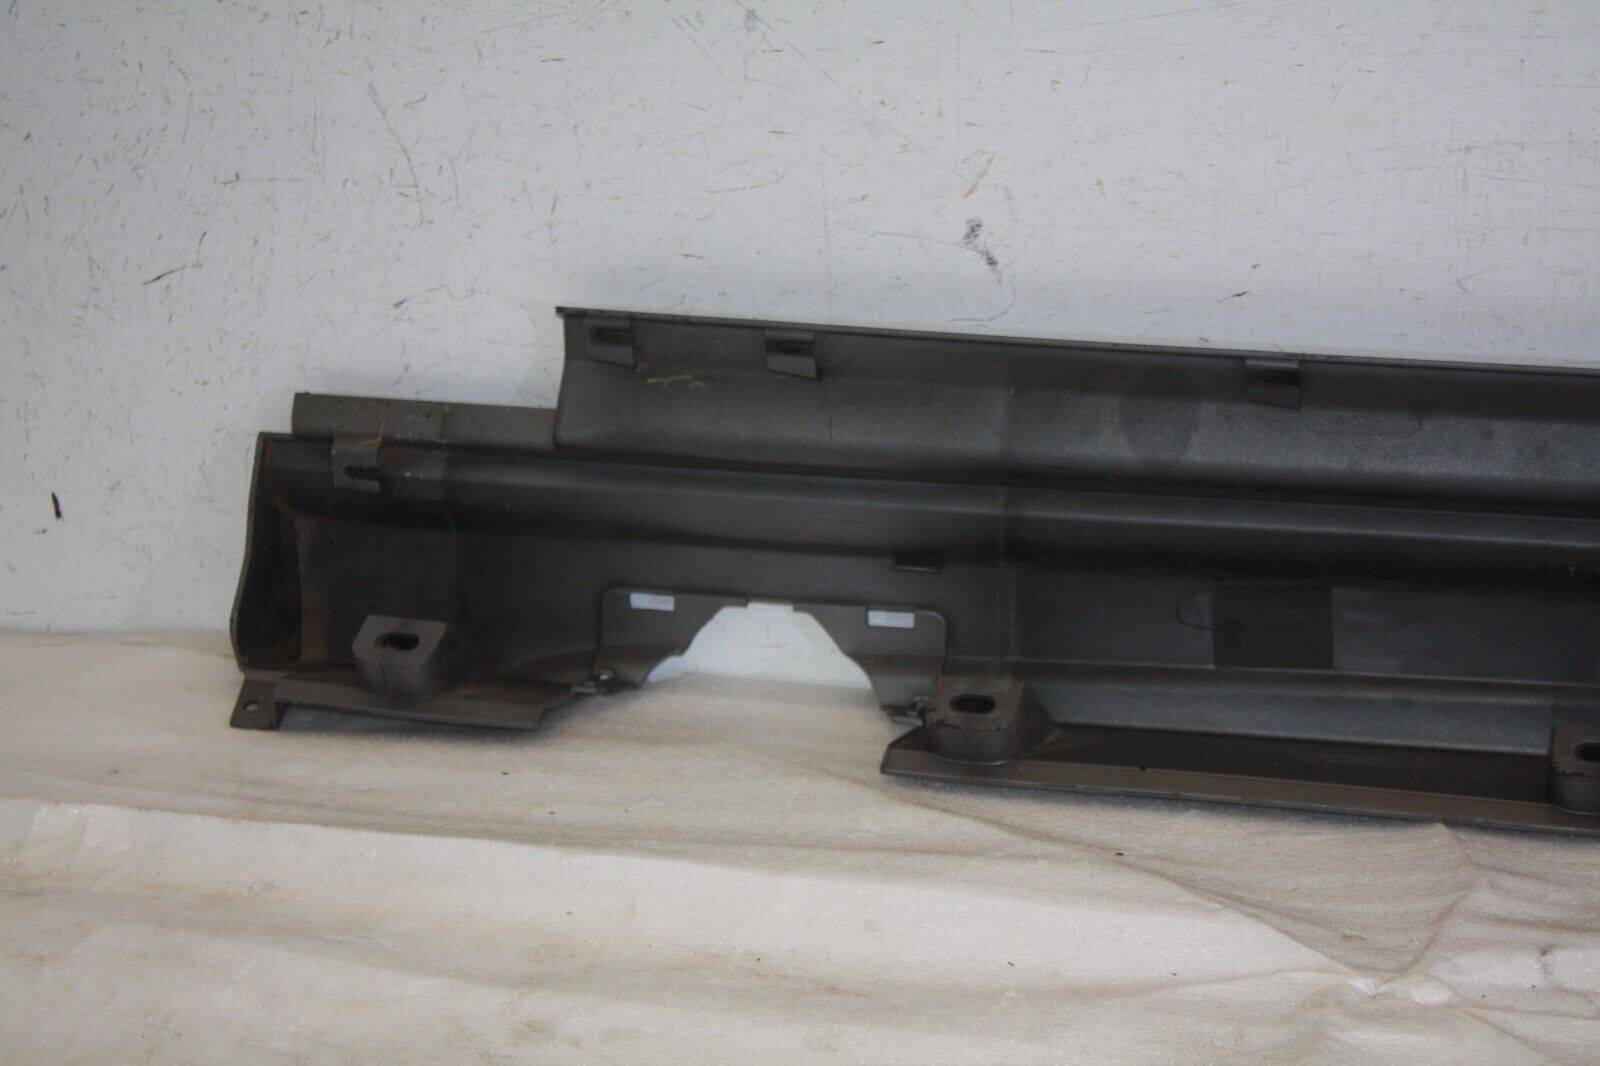 Range-Rover-Autobiography-Right-Side-Skirt-2009-TO-2012-BH4M-200B08-A-Genuine-176202550823-18